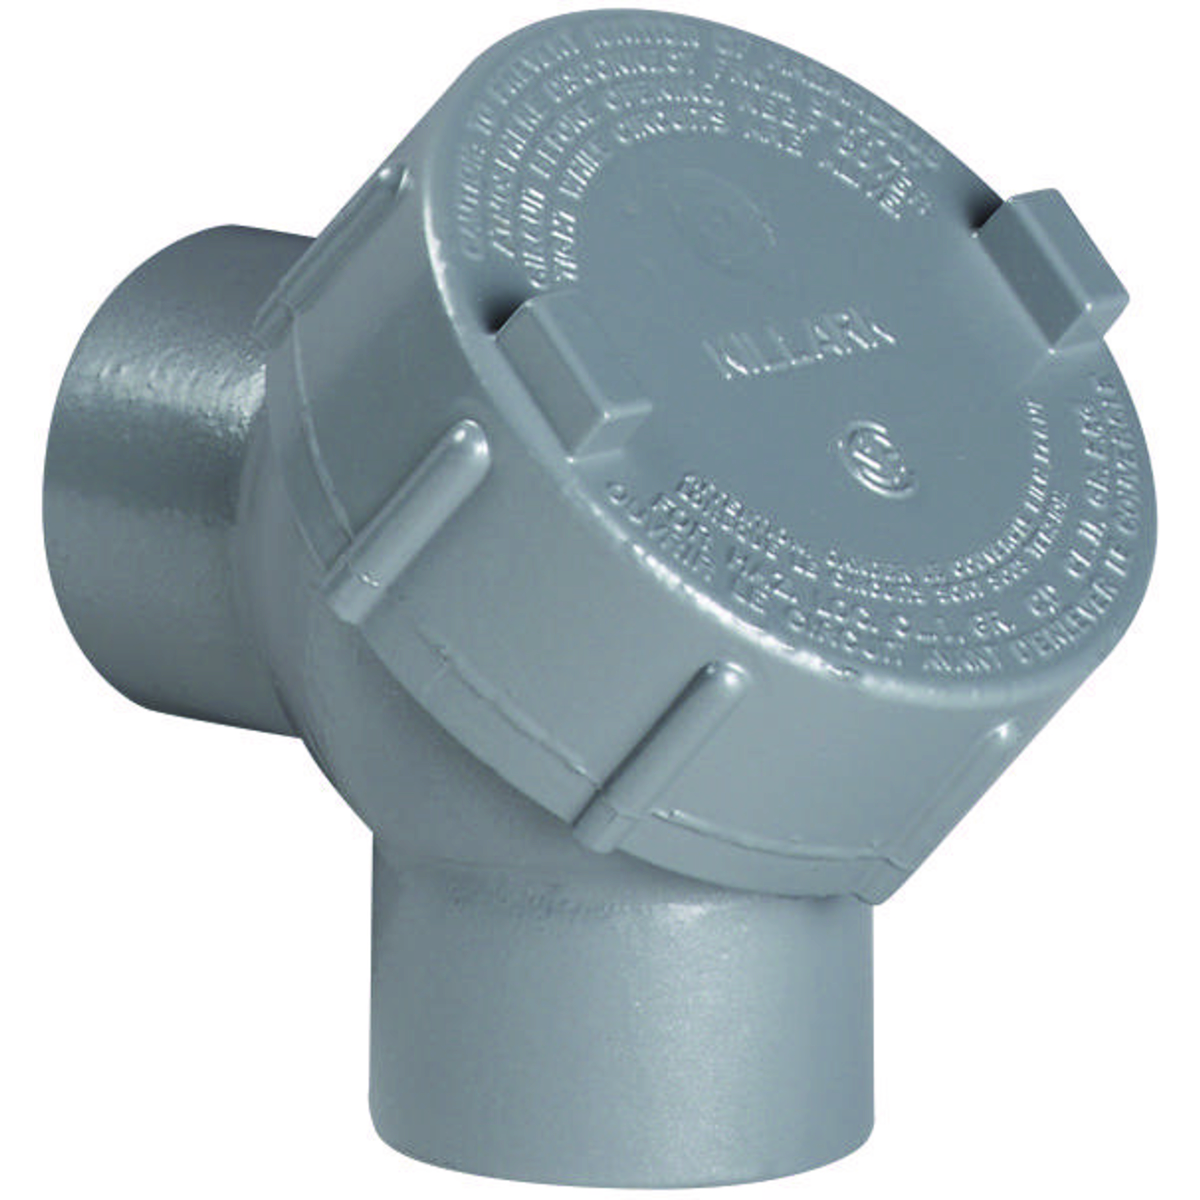 Y SERIES - ALUMINUM ATEX AND IECEX CERTIFIED 90-DEGREE CAPPED ELBOW -FEMALE/FEMALE - HUB SIZE 3/4 INCH